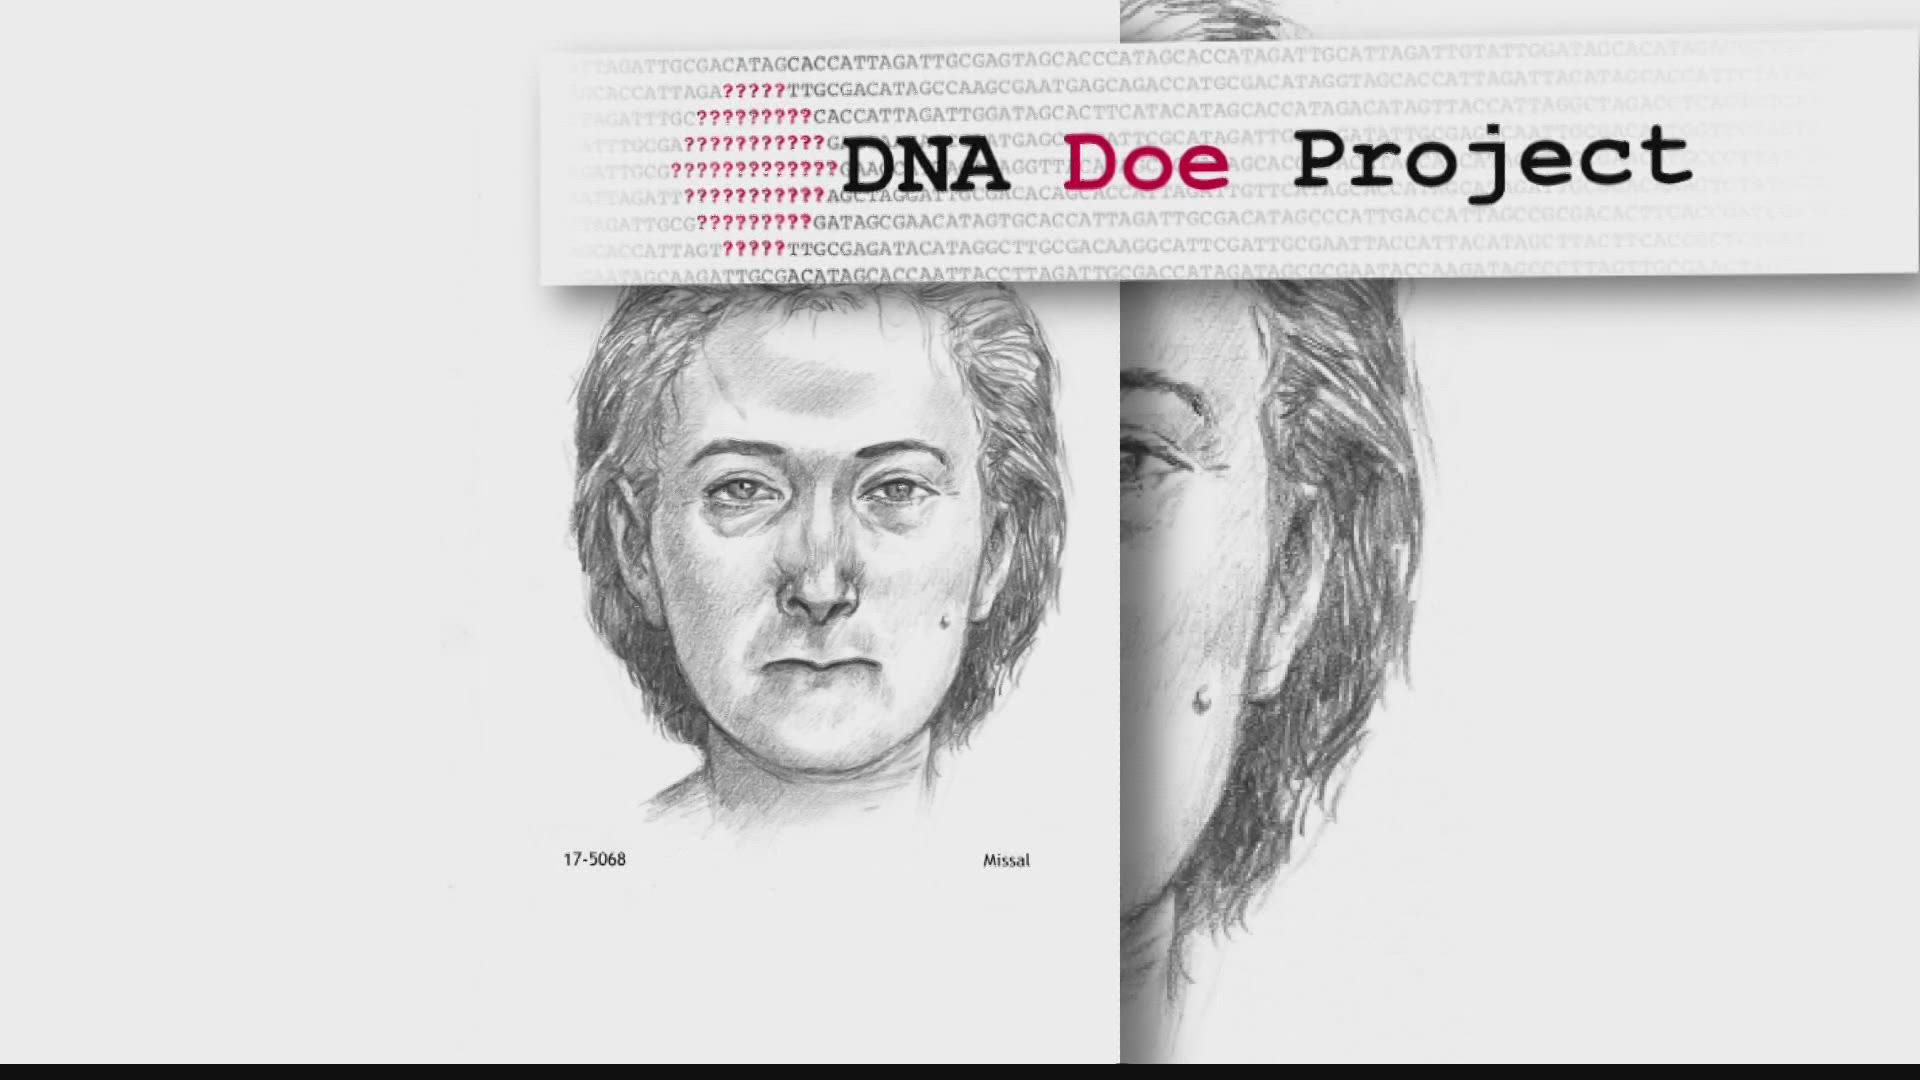 Genetic Genealogy uses public-sourced DNA databases to help create a family tree centered around the profile of an unidentified body.